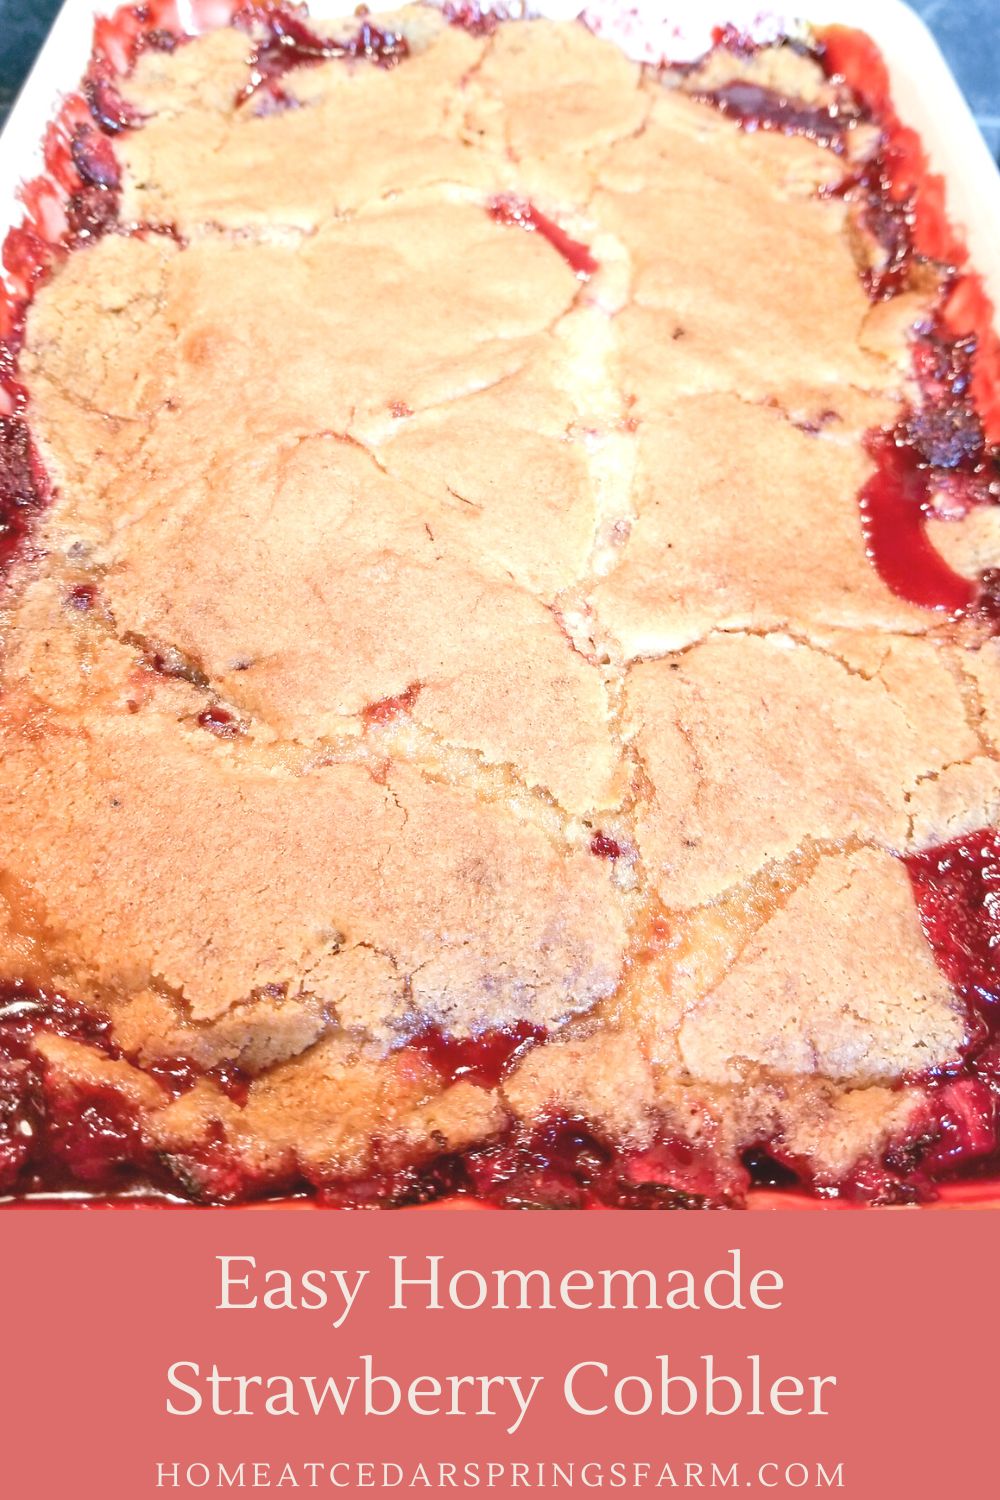 Strawberry cobbler with text overlay